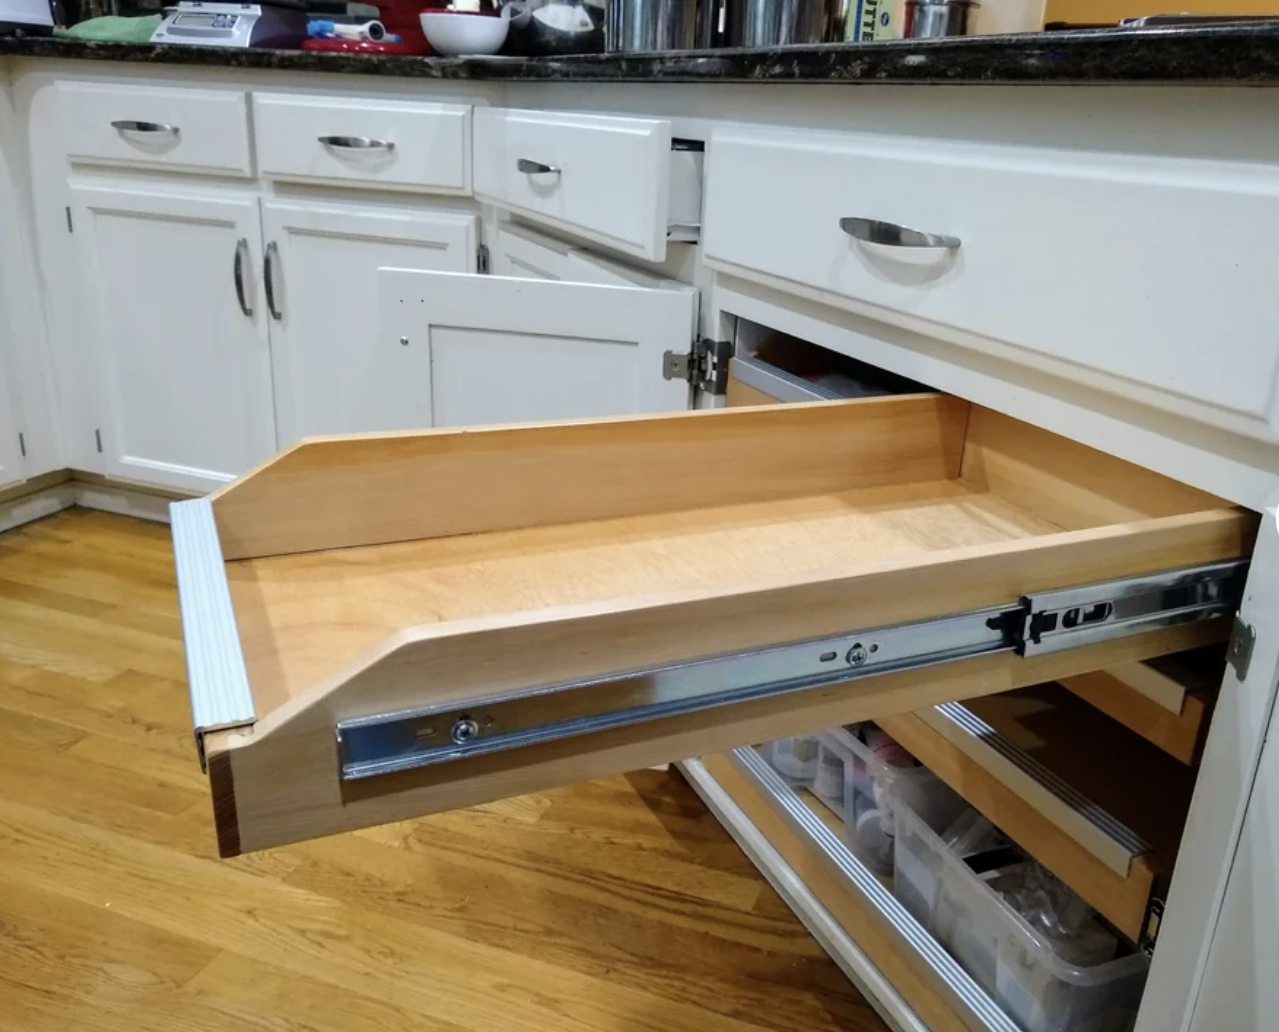 A woodworking project showing a kitchen cabinet with an open drawer featuring neatly organized utensils